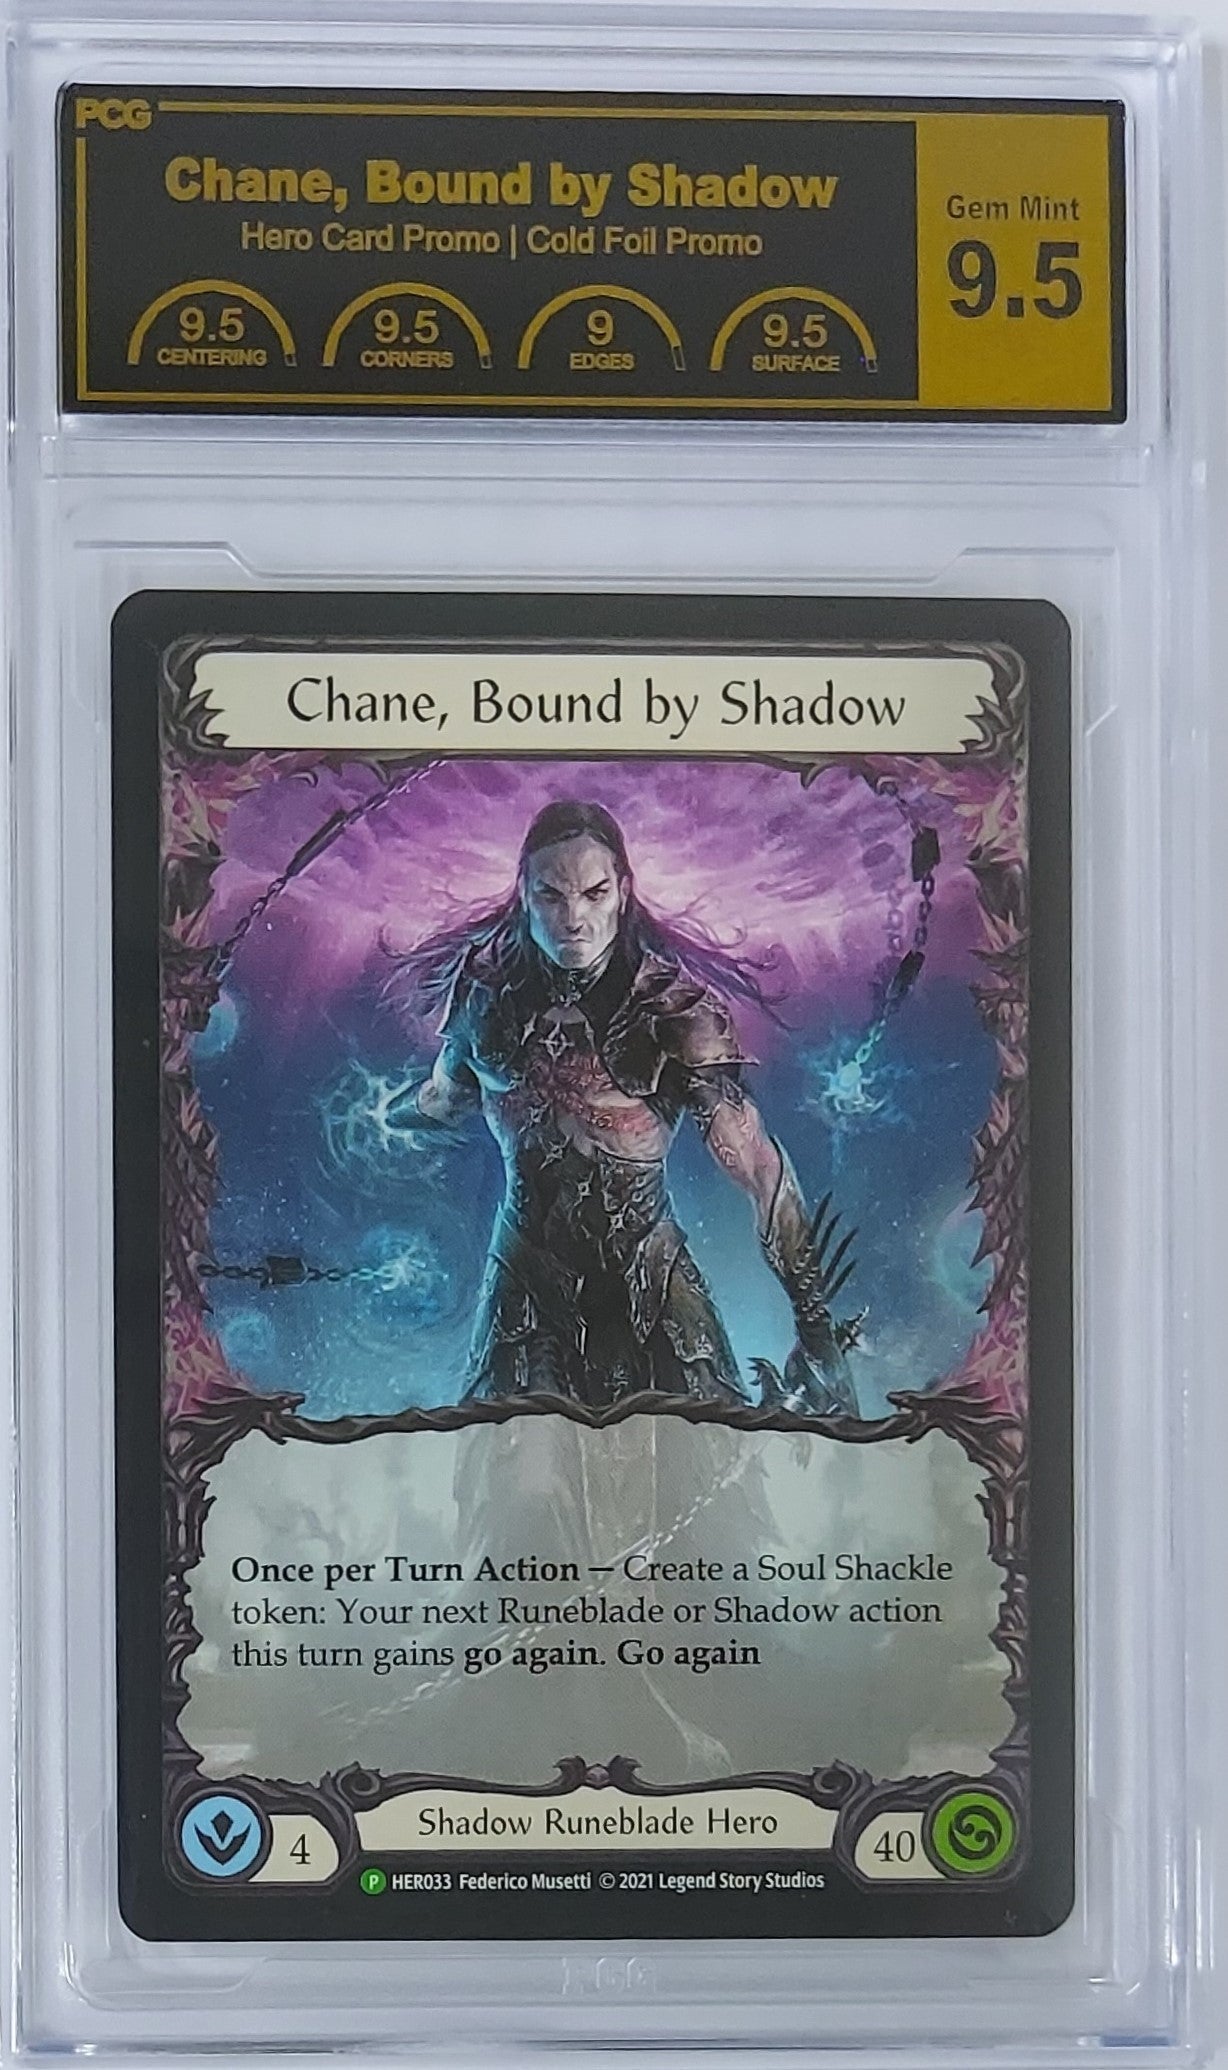 [PCG 9.5] Chane, Bound by Shadow - HER033